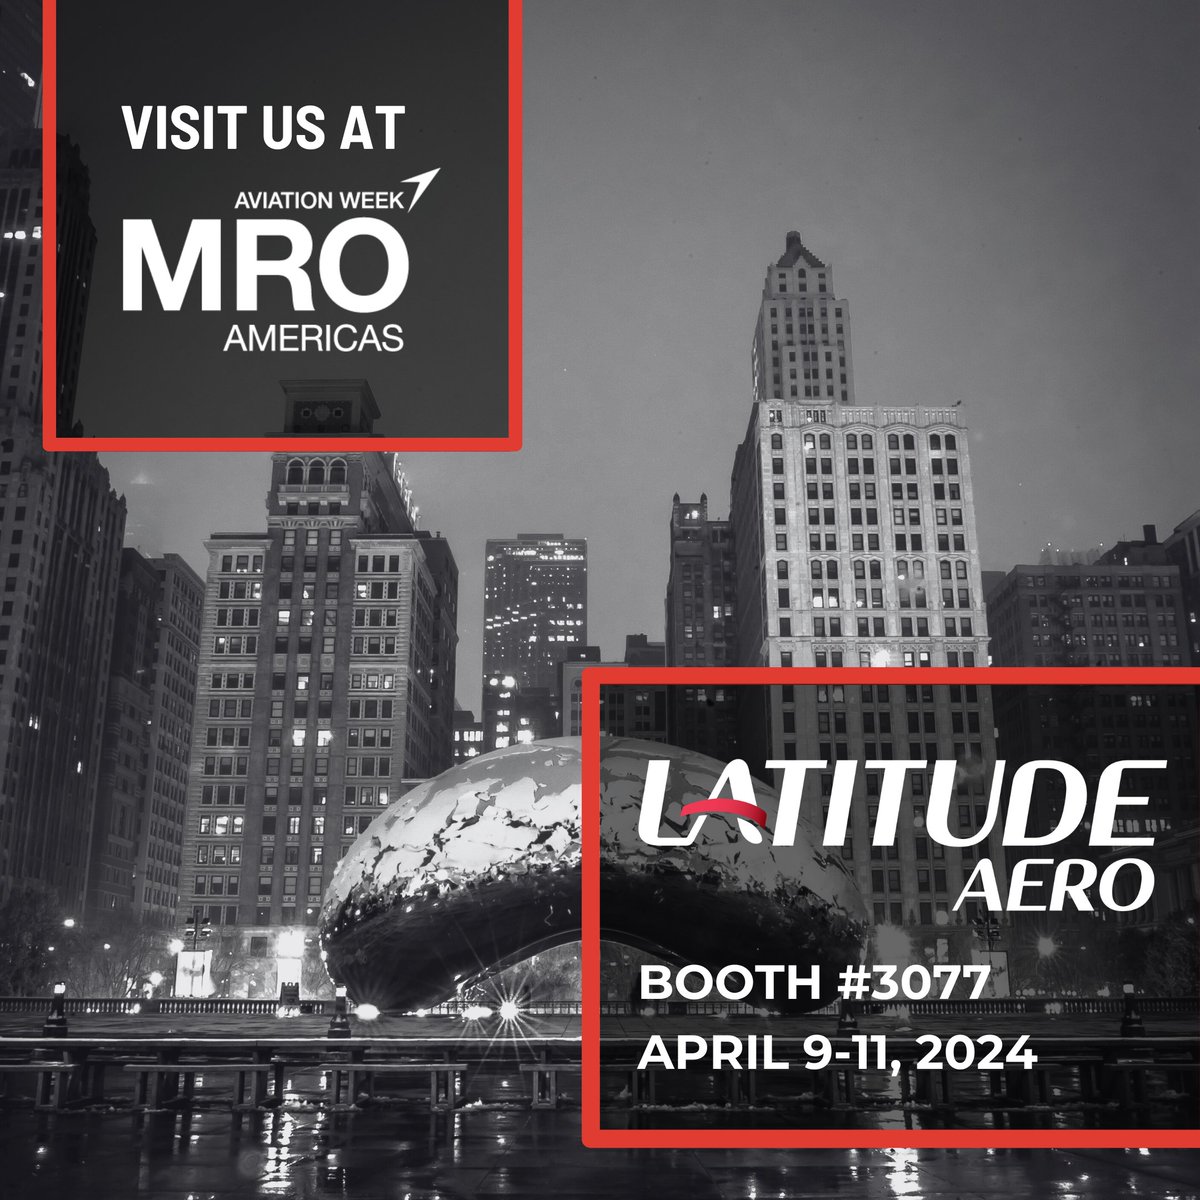 Latitude Aero is in the final stages of preparing for #MROAmericas! Reach out to our team at sales@latitude-aero.com to schedule a meeting today. 🏙️ 🛩️ #LatitudeAero #PaxEx #AvGeek #MRO #Chicago #Networking